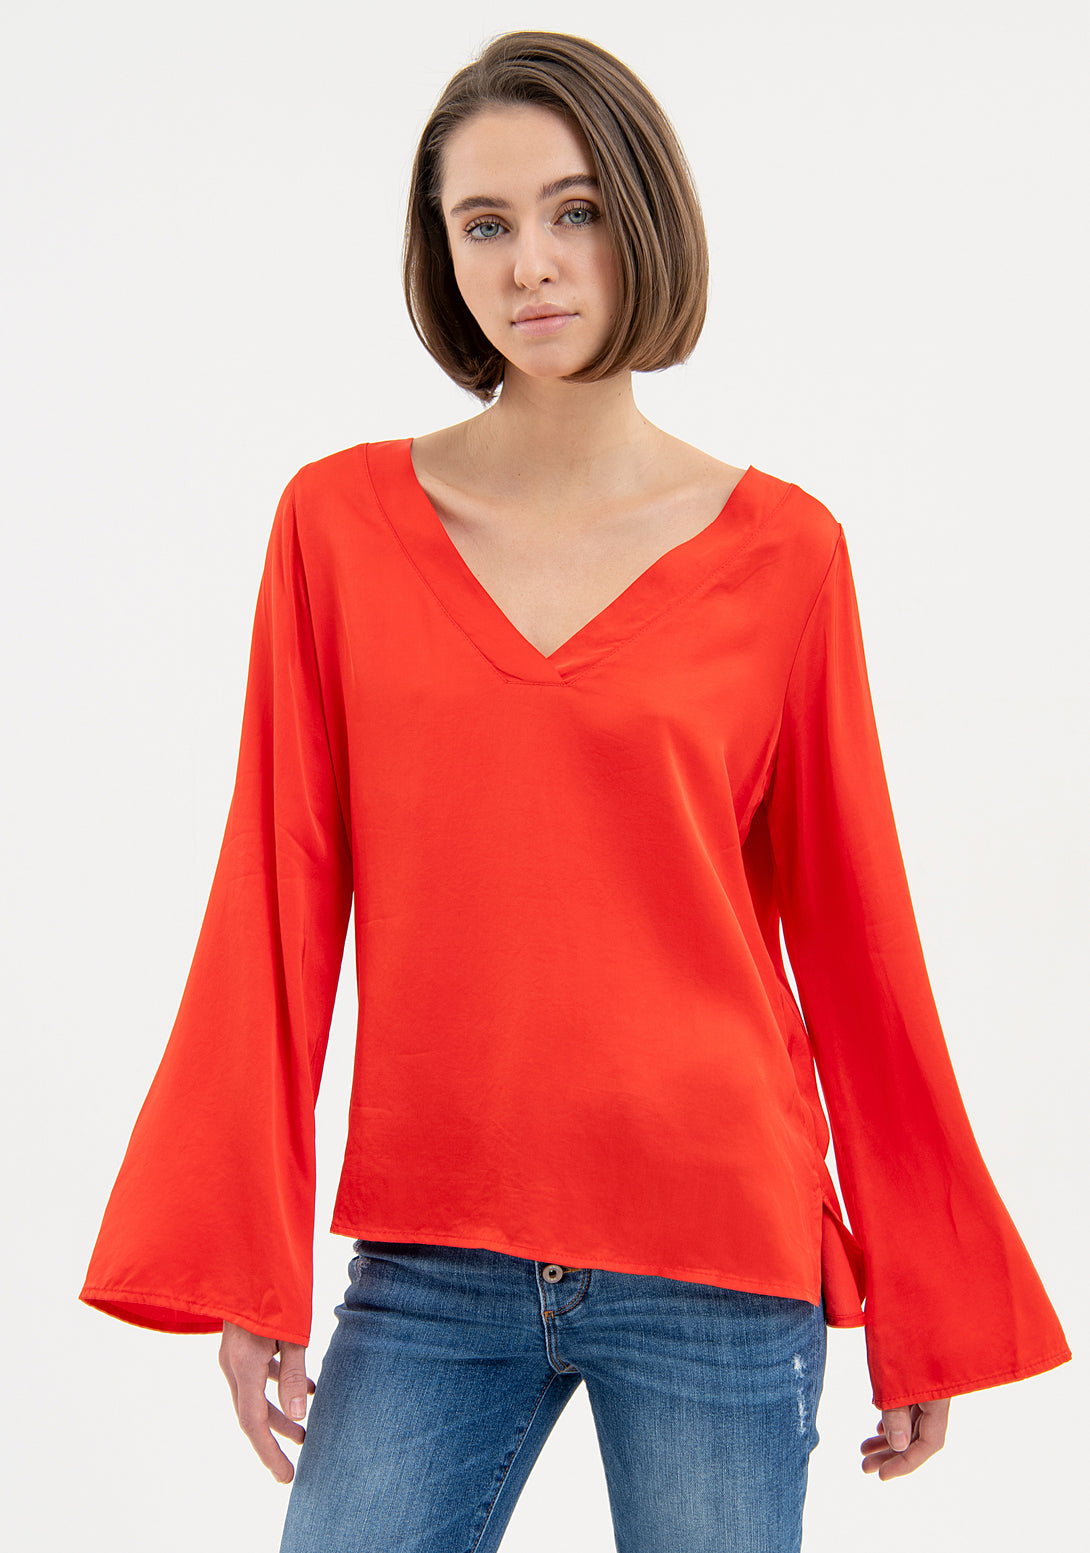 Blouse regular fit made in viscose